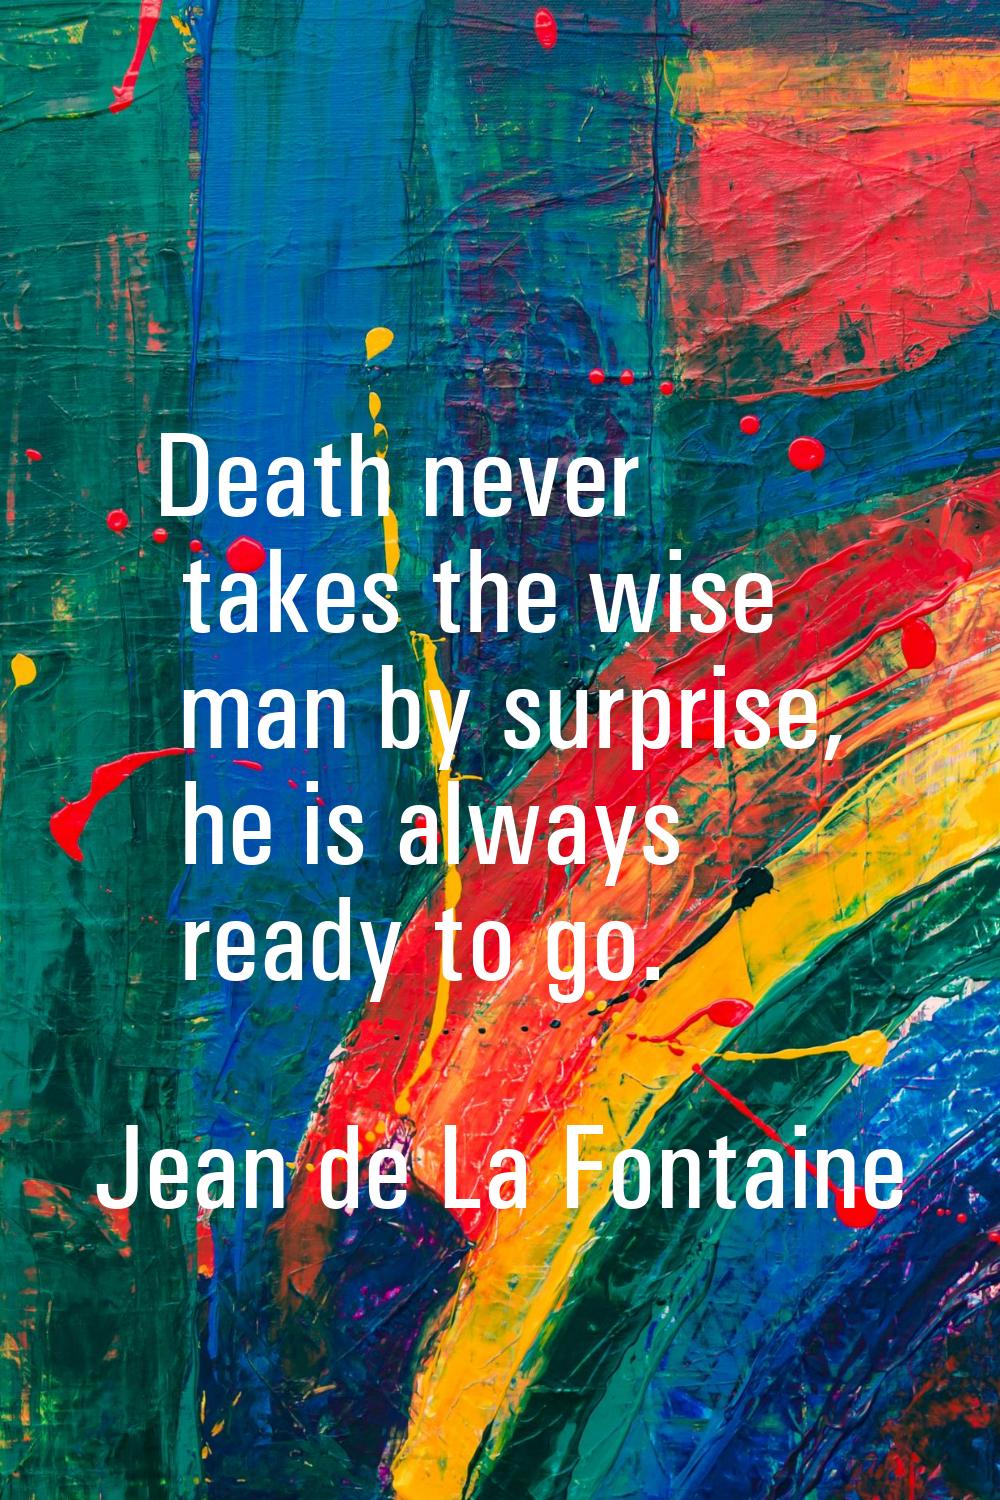 Death never takes the wise man by surprise, he is always ready to go.